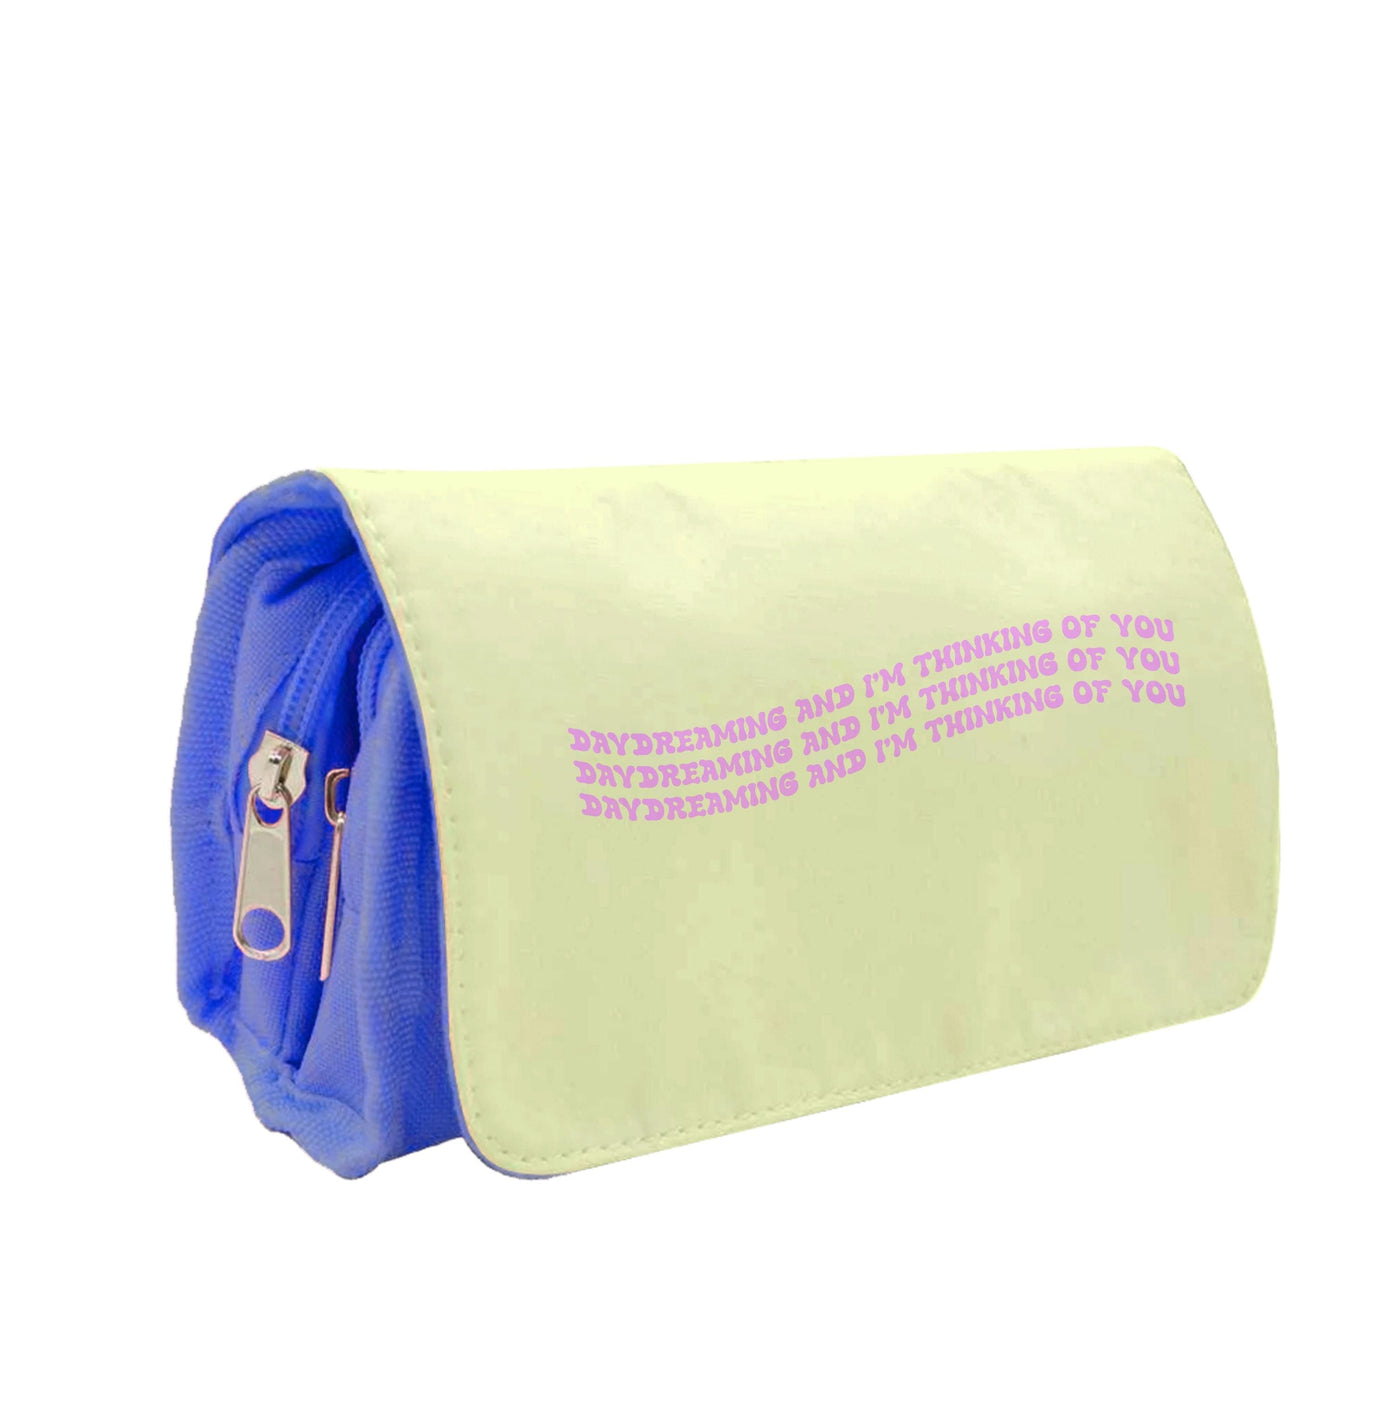 Daydreaming - Easylife Pencil Case